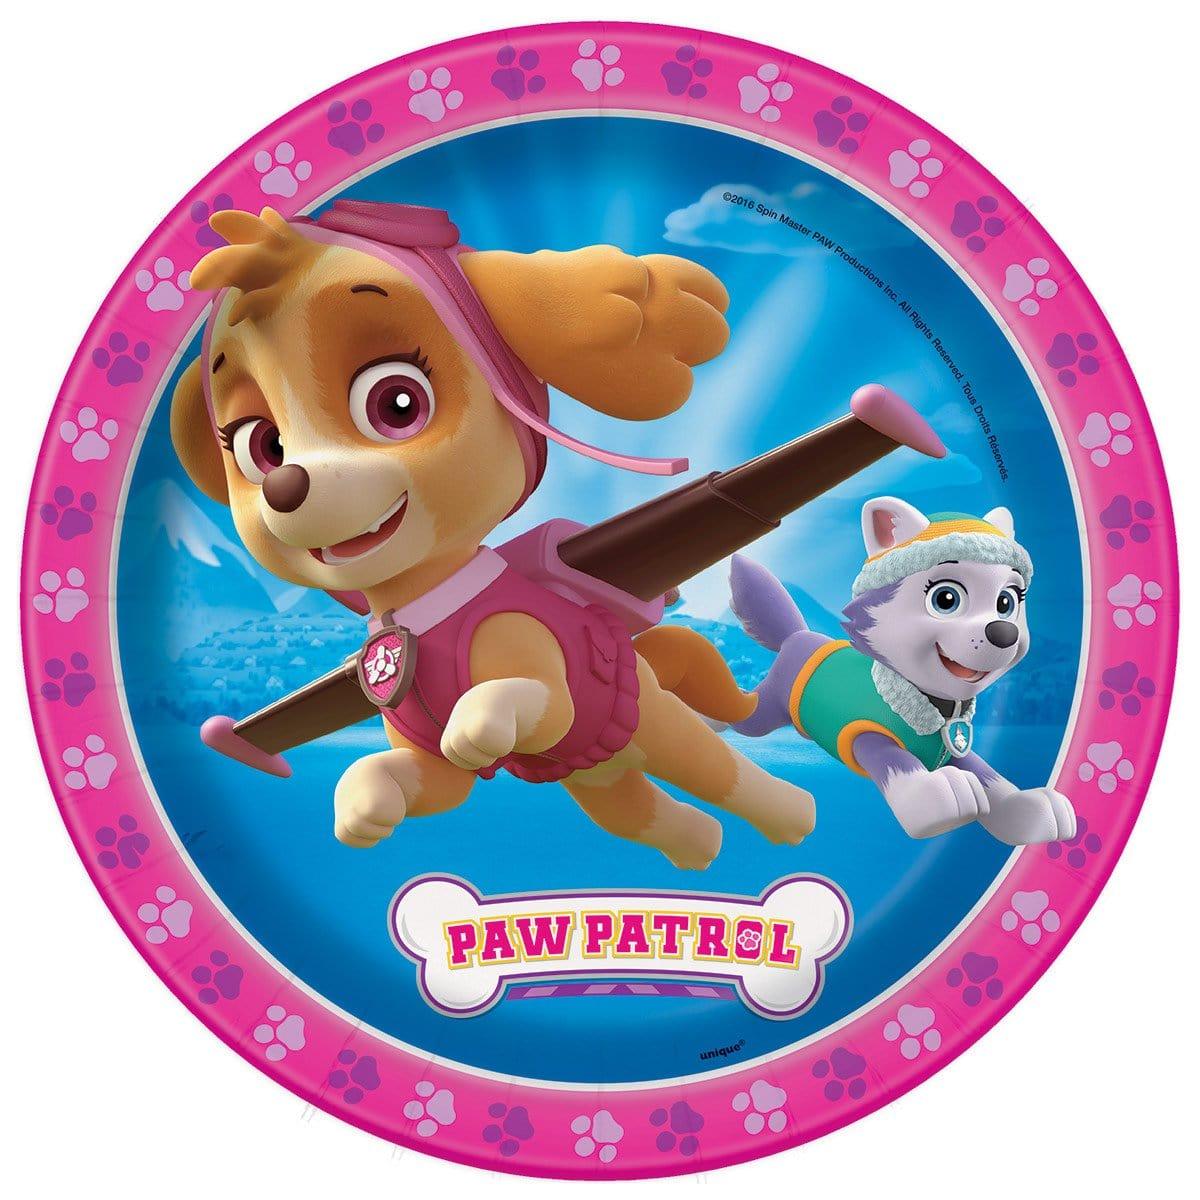 Buy Kids Birthday Paw Patrol Girl Dinner Plates 9 inches, 8 per package sold at Party Expert